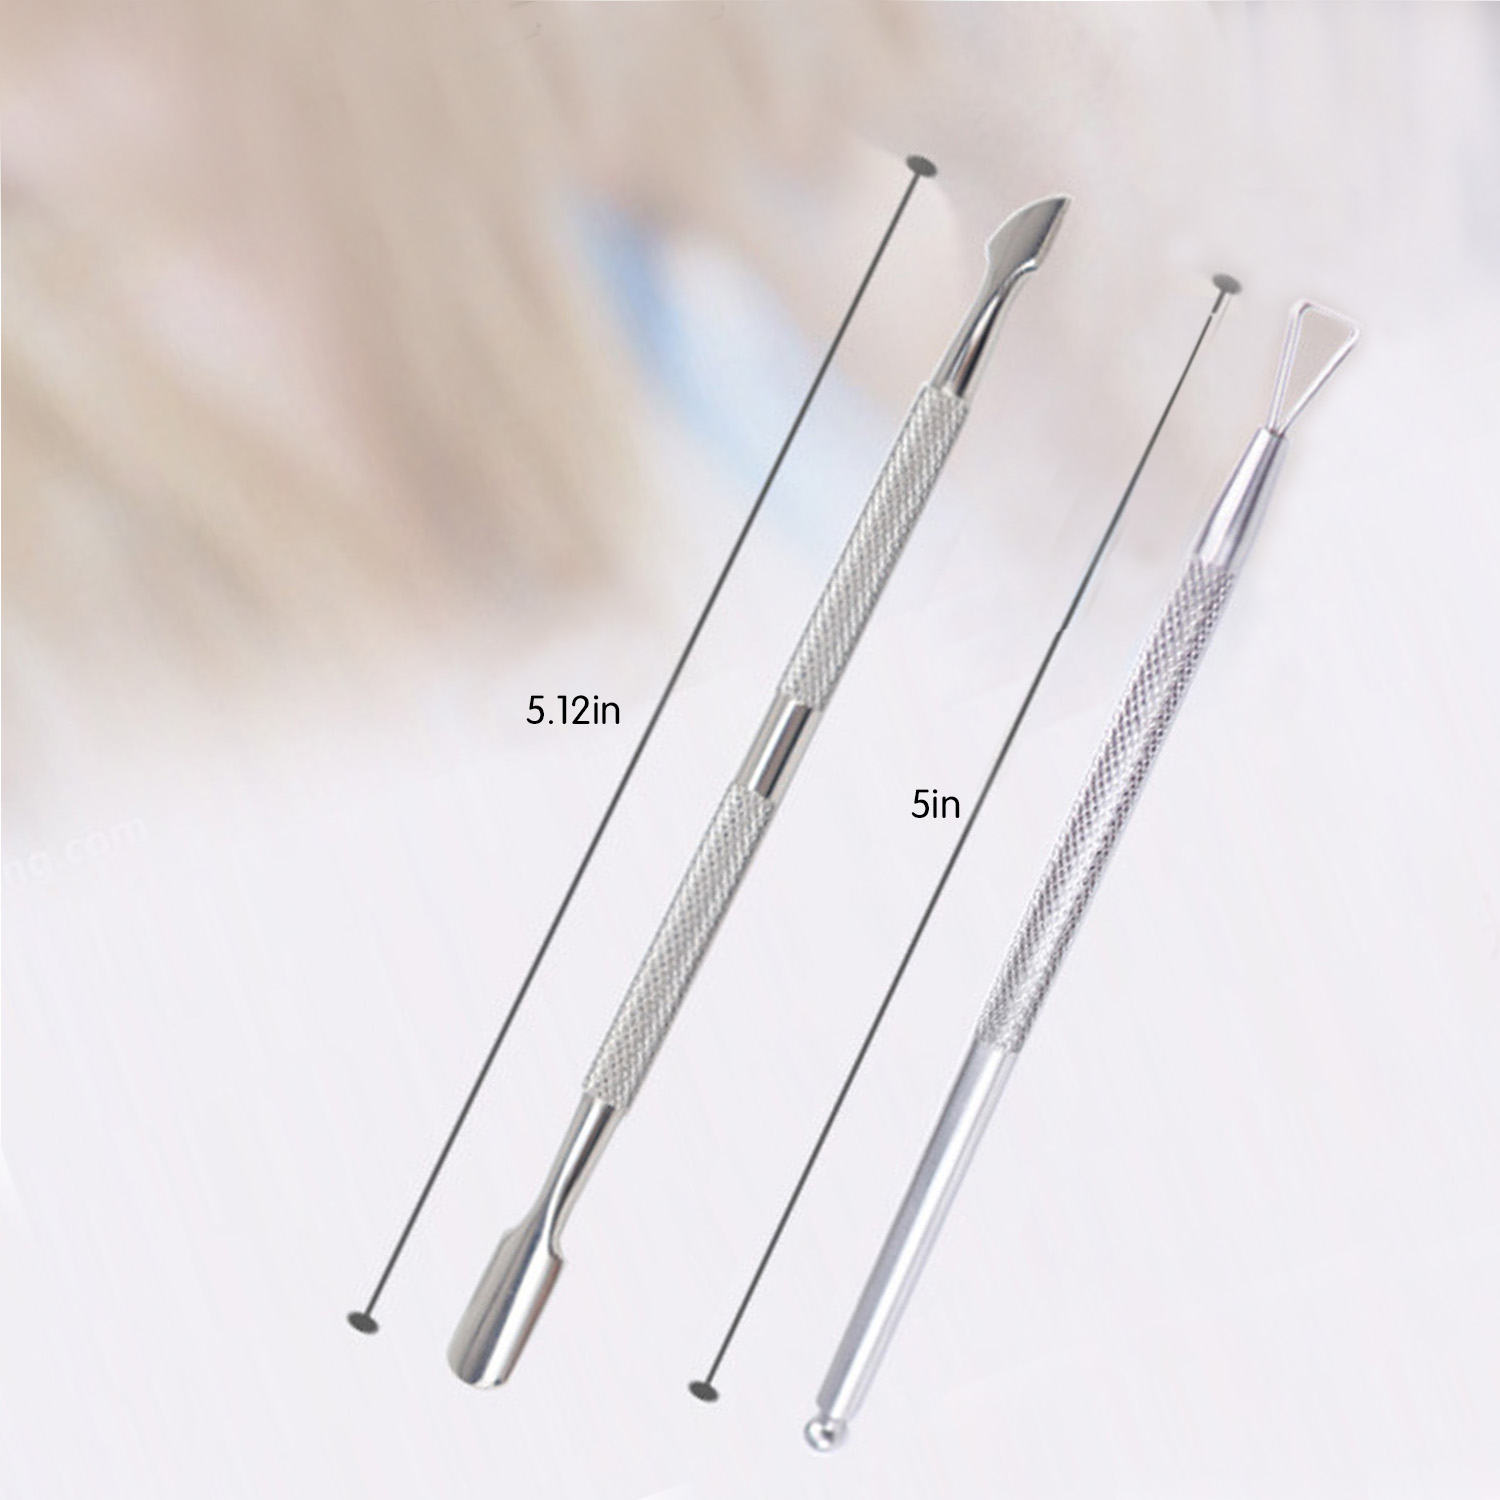 Professional Stainless Steel Cuticle Pusher, Durable Pedicure Manicure Tools for Fingernails and Toenails